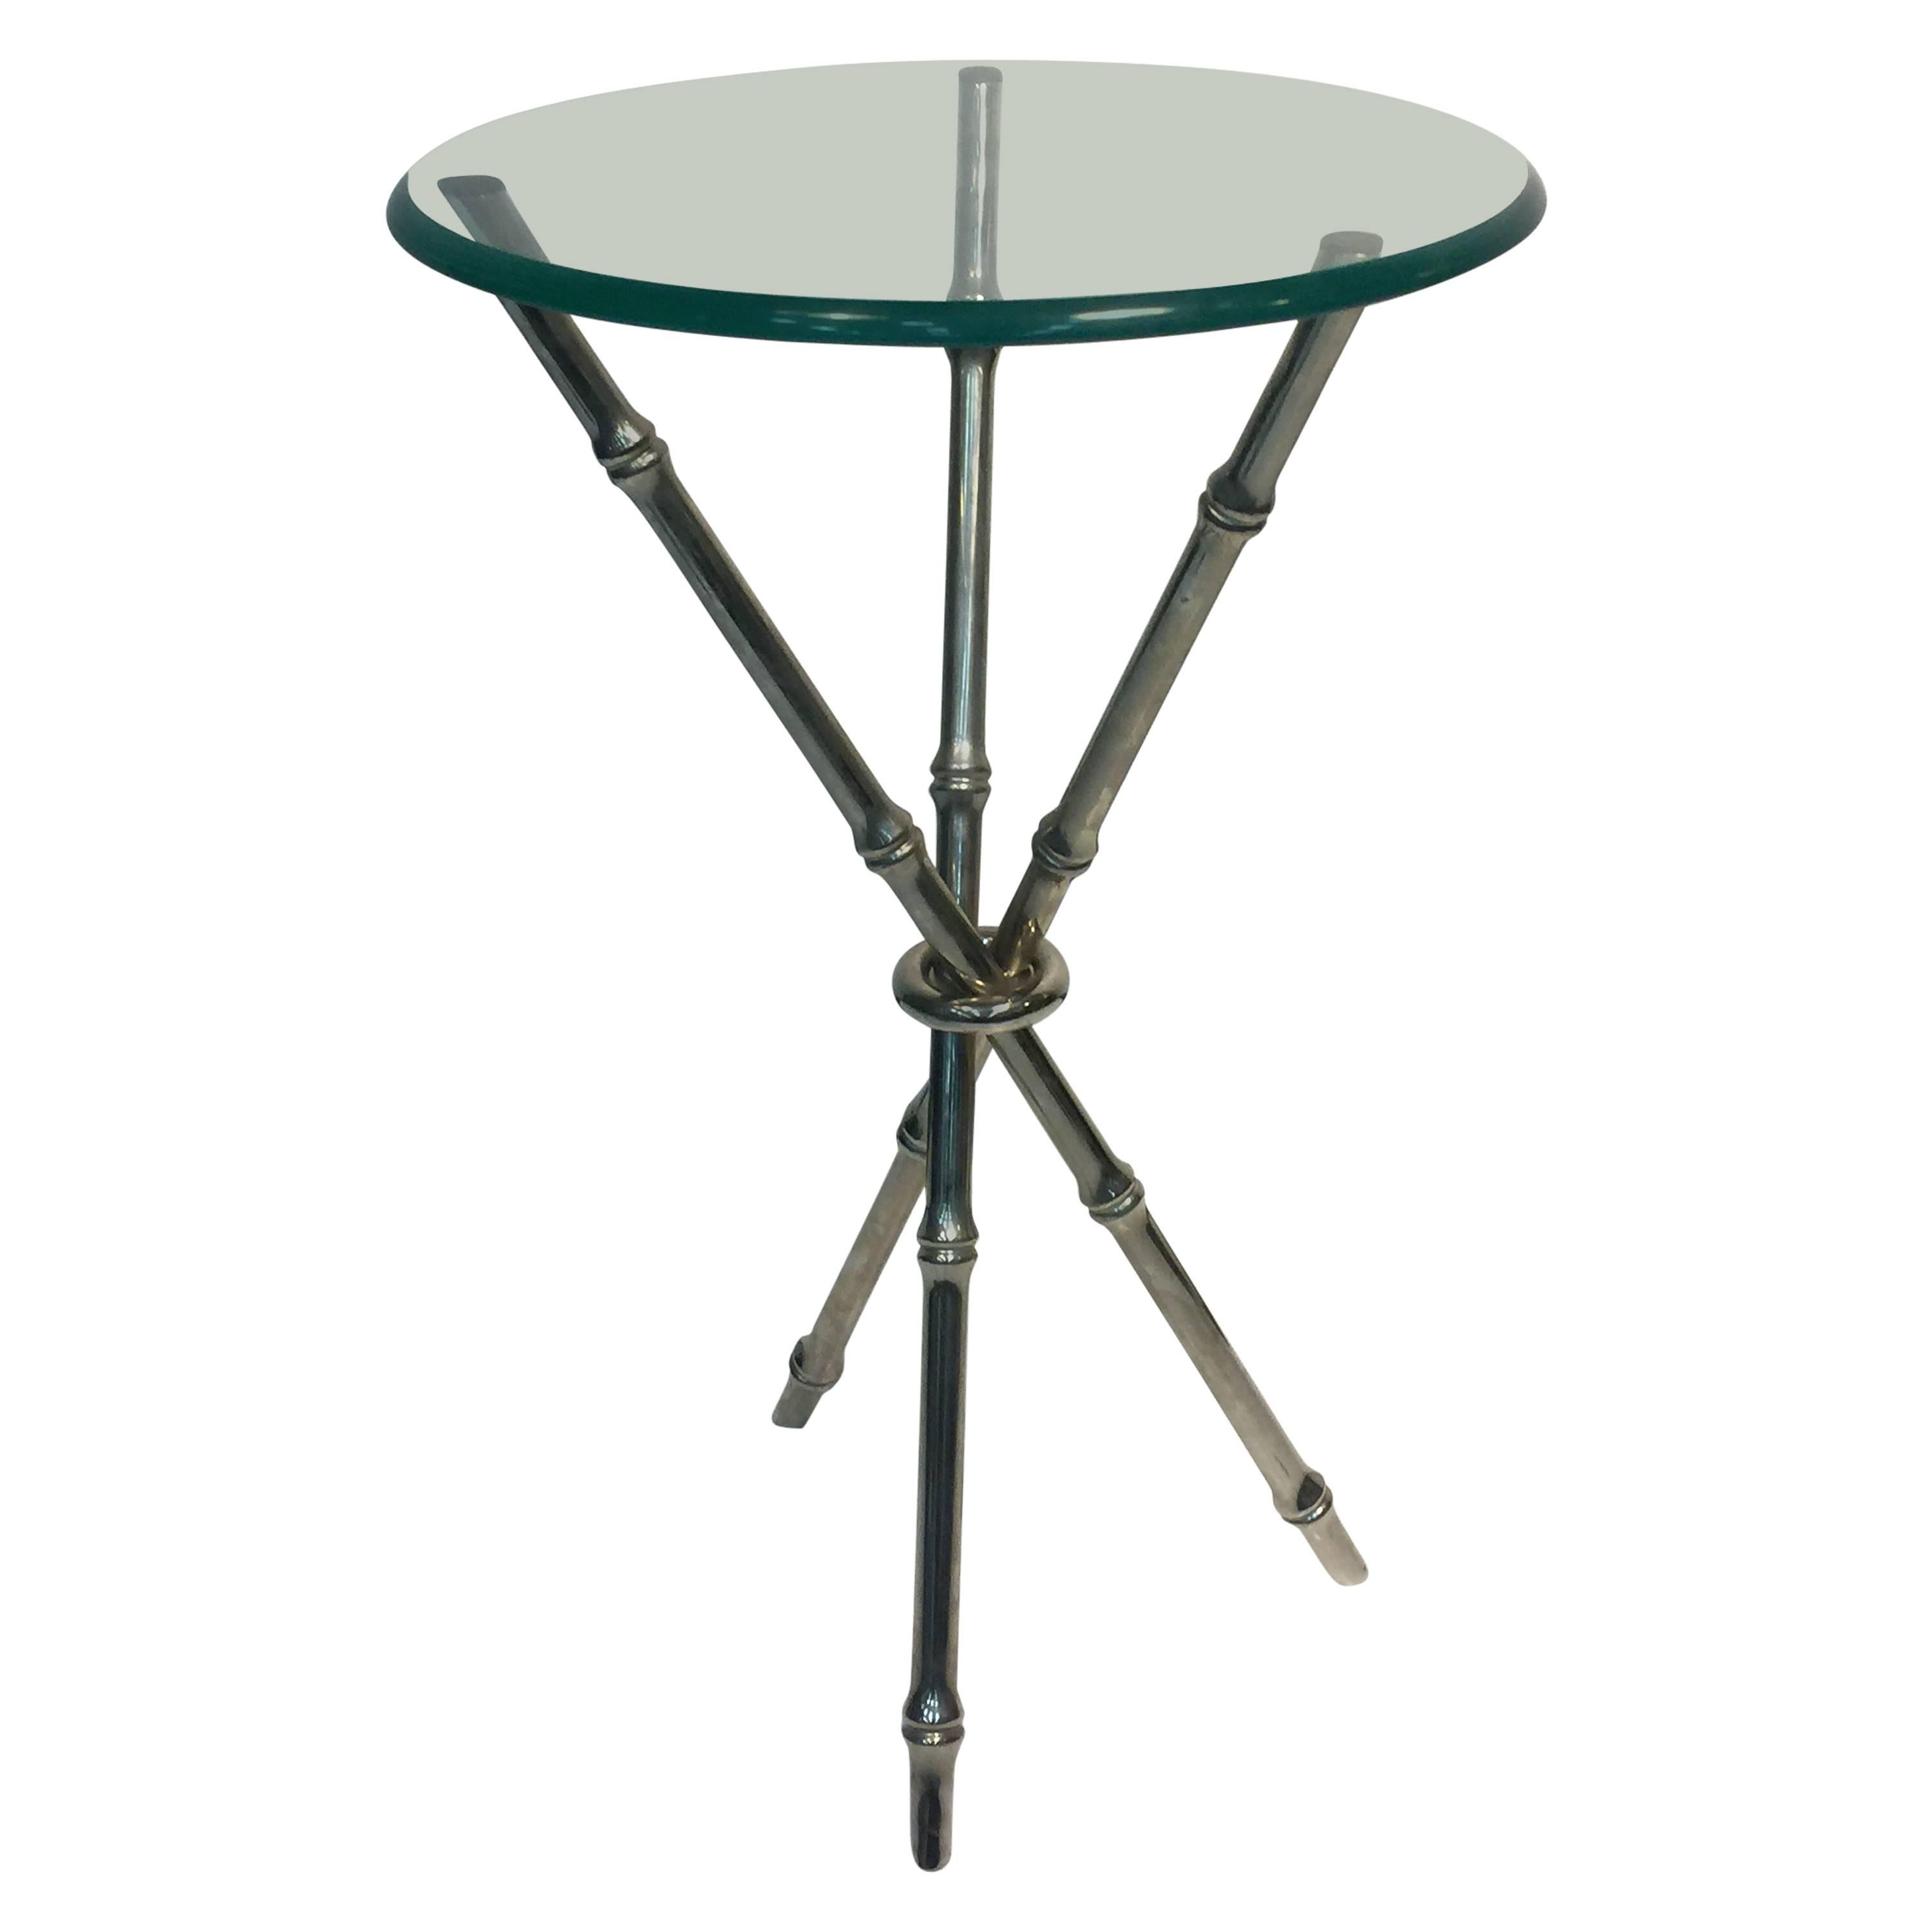 Beautiful Faux Bamboo Chrome Side Table or Accent Table For Sale